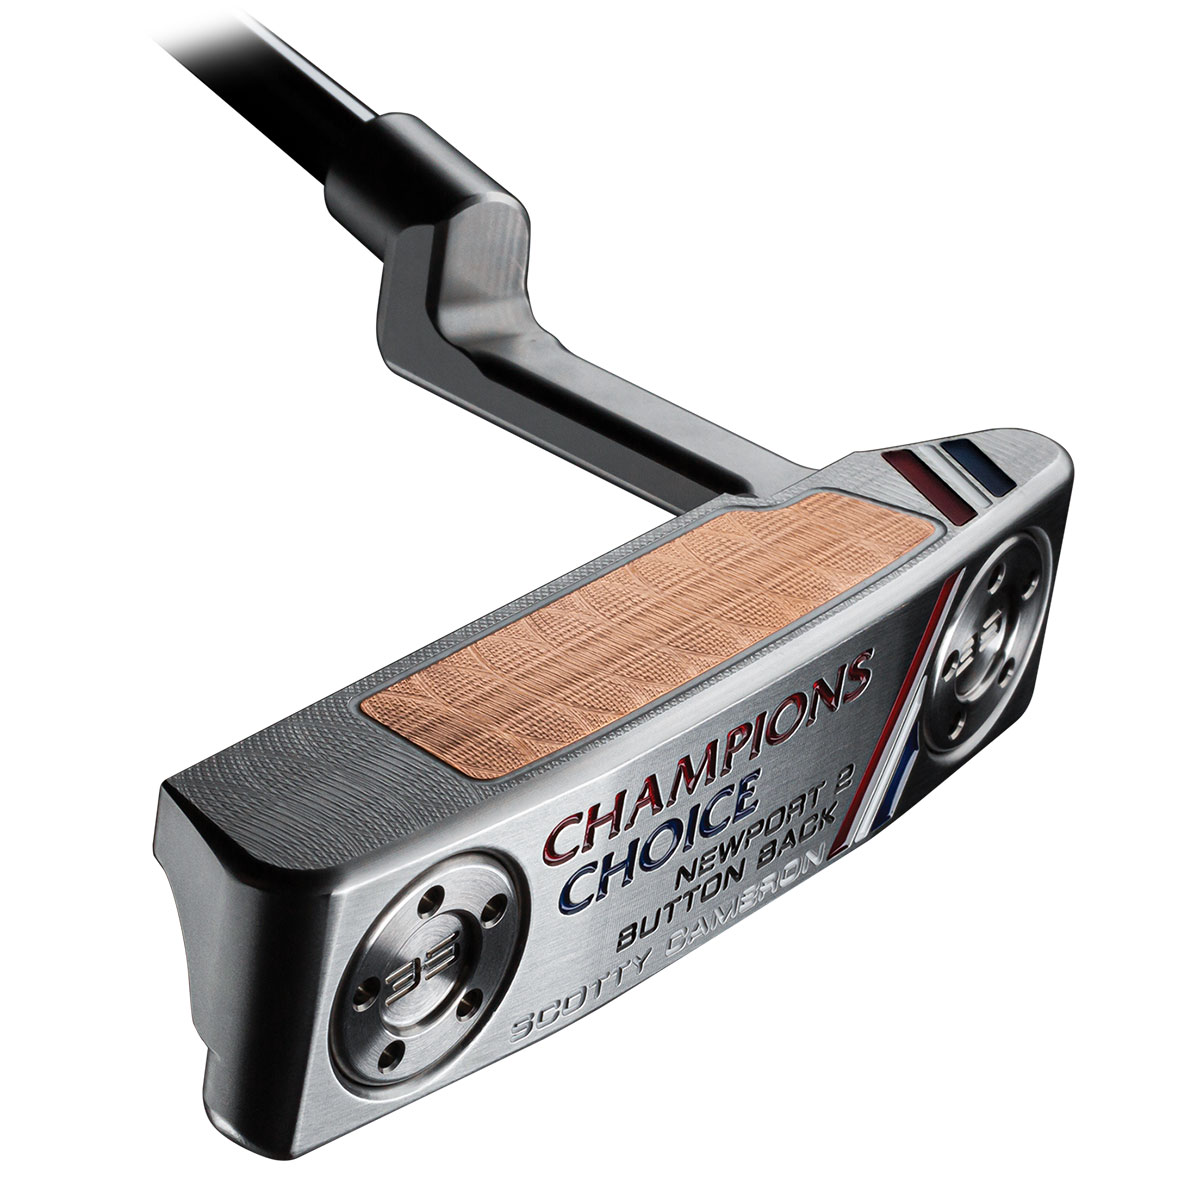 Titleist Scotty Cameron Newport 2 Champions Choice Putter from american